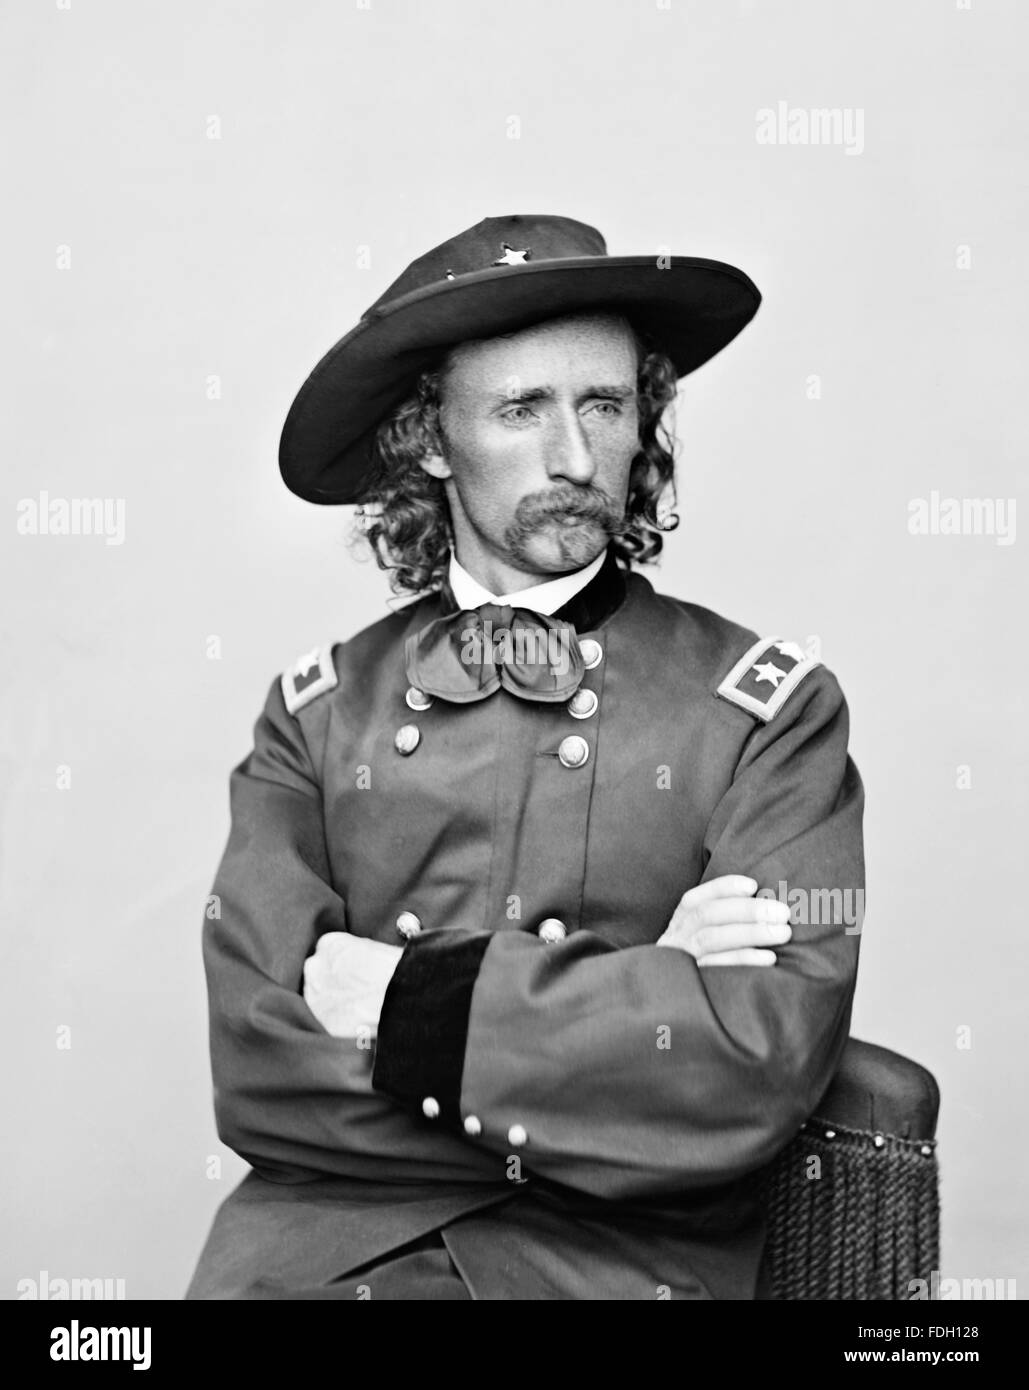 General Custer. Portrait of General George Armstrong Custer (1839 –1876), a United States Army officer and cavalry commander in the American Civil War and the American Indian Wars. Photo May 1865 Stock Photo